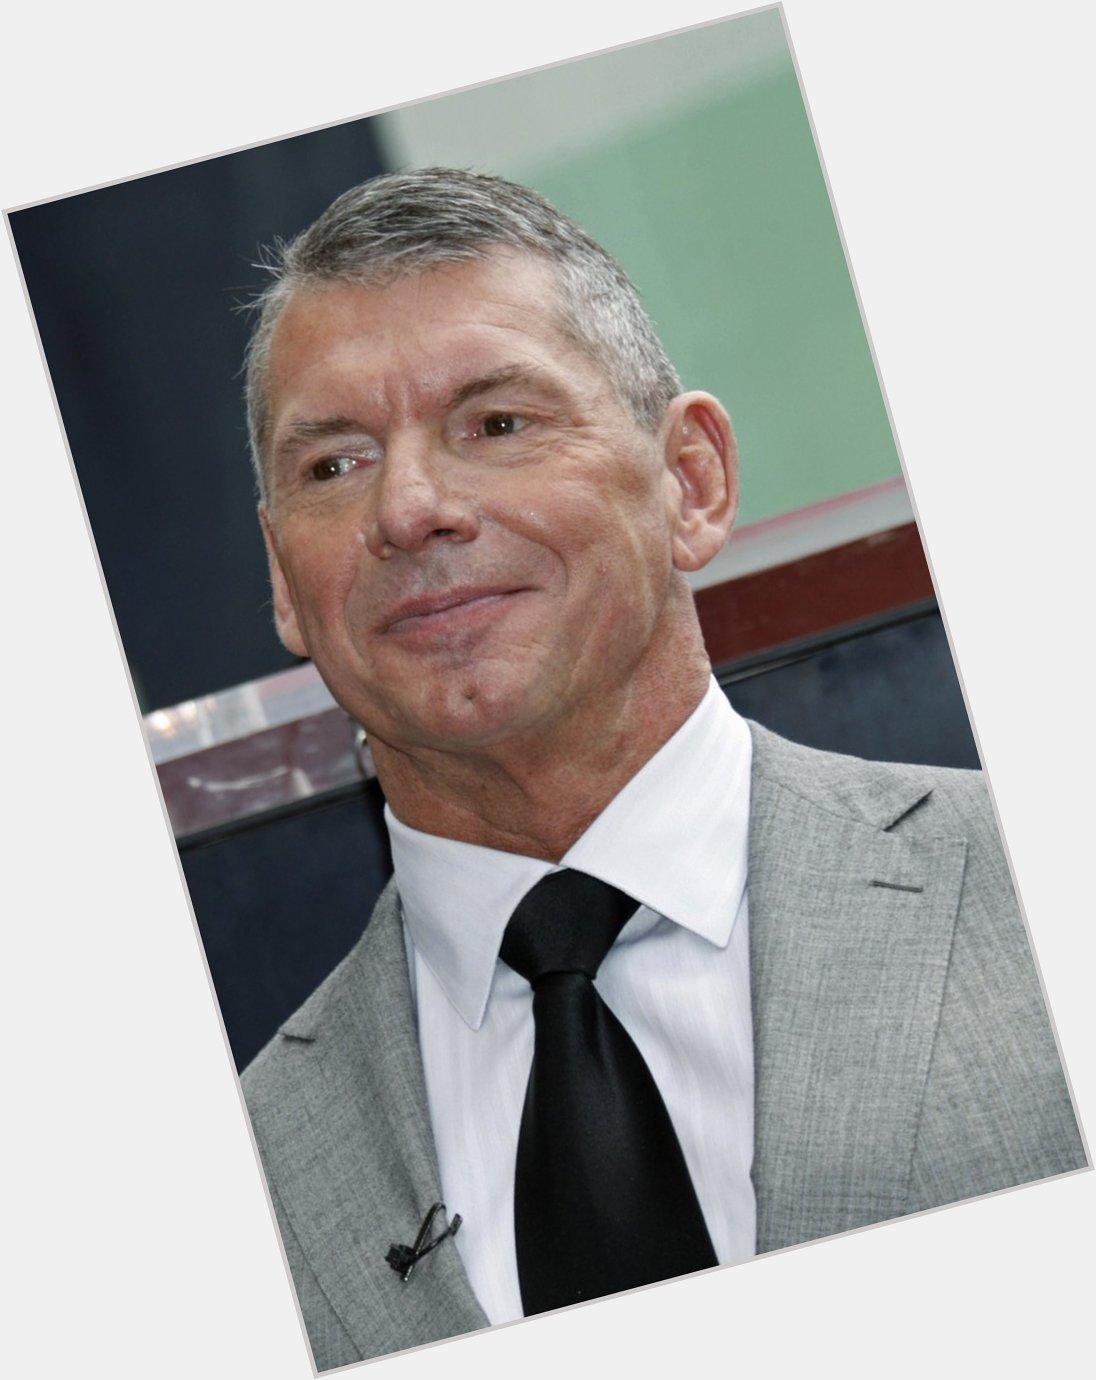 A huge happy birthday shoutout to chairman and CEO Vince McMahon (Reuters)  